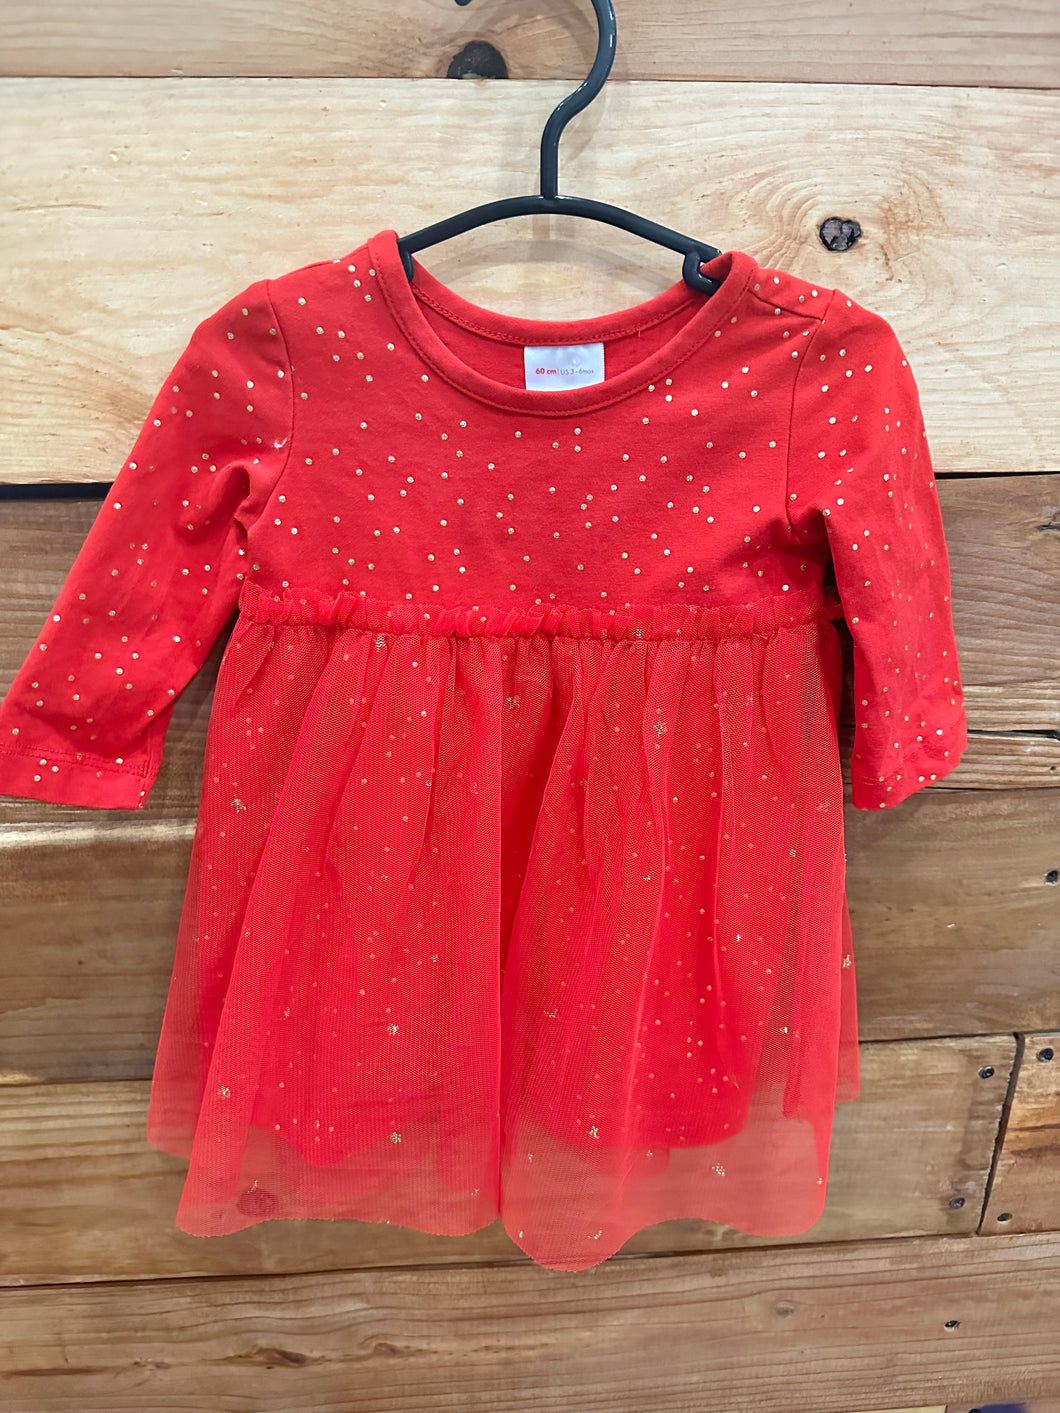 Hanna Andersson Red Tulle Dress Size 3-6m